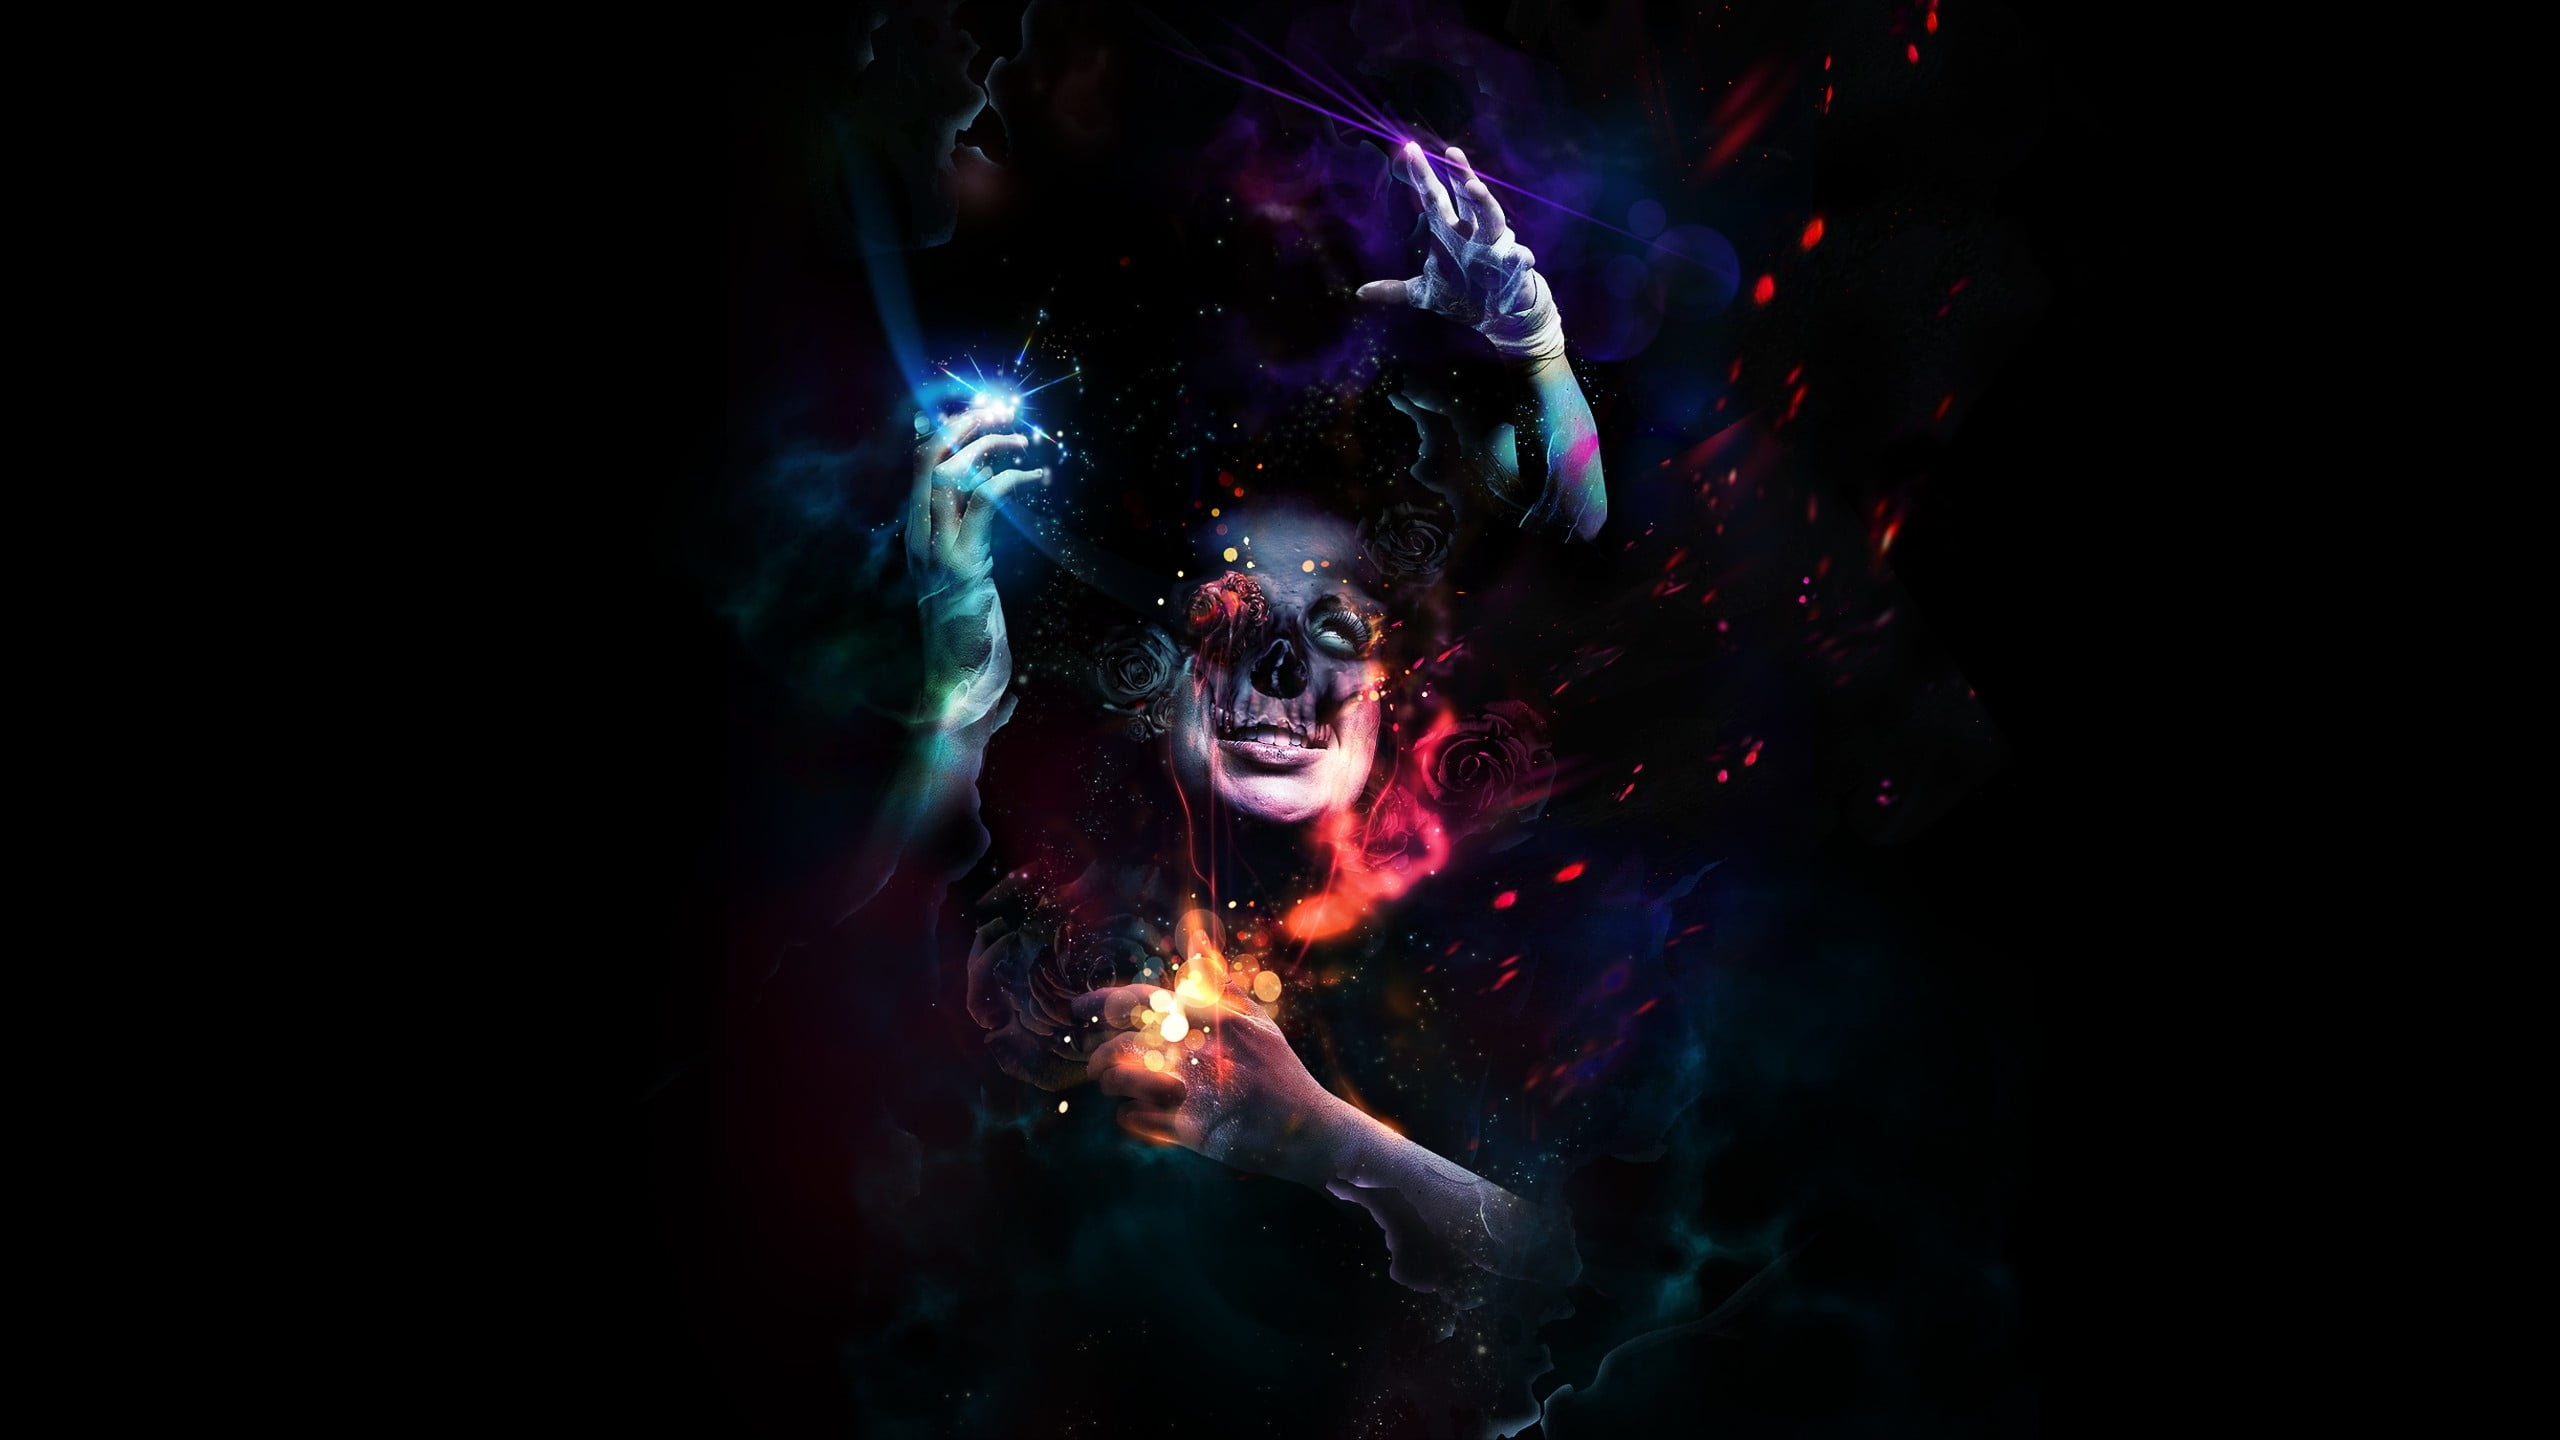 woman with three hands illustration with cosmic background